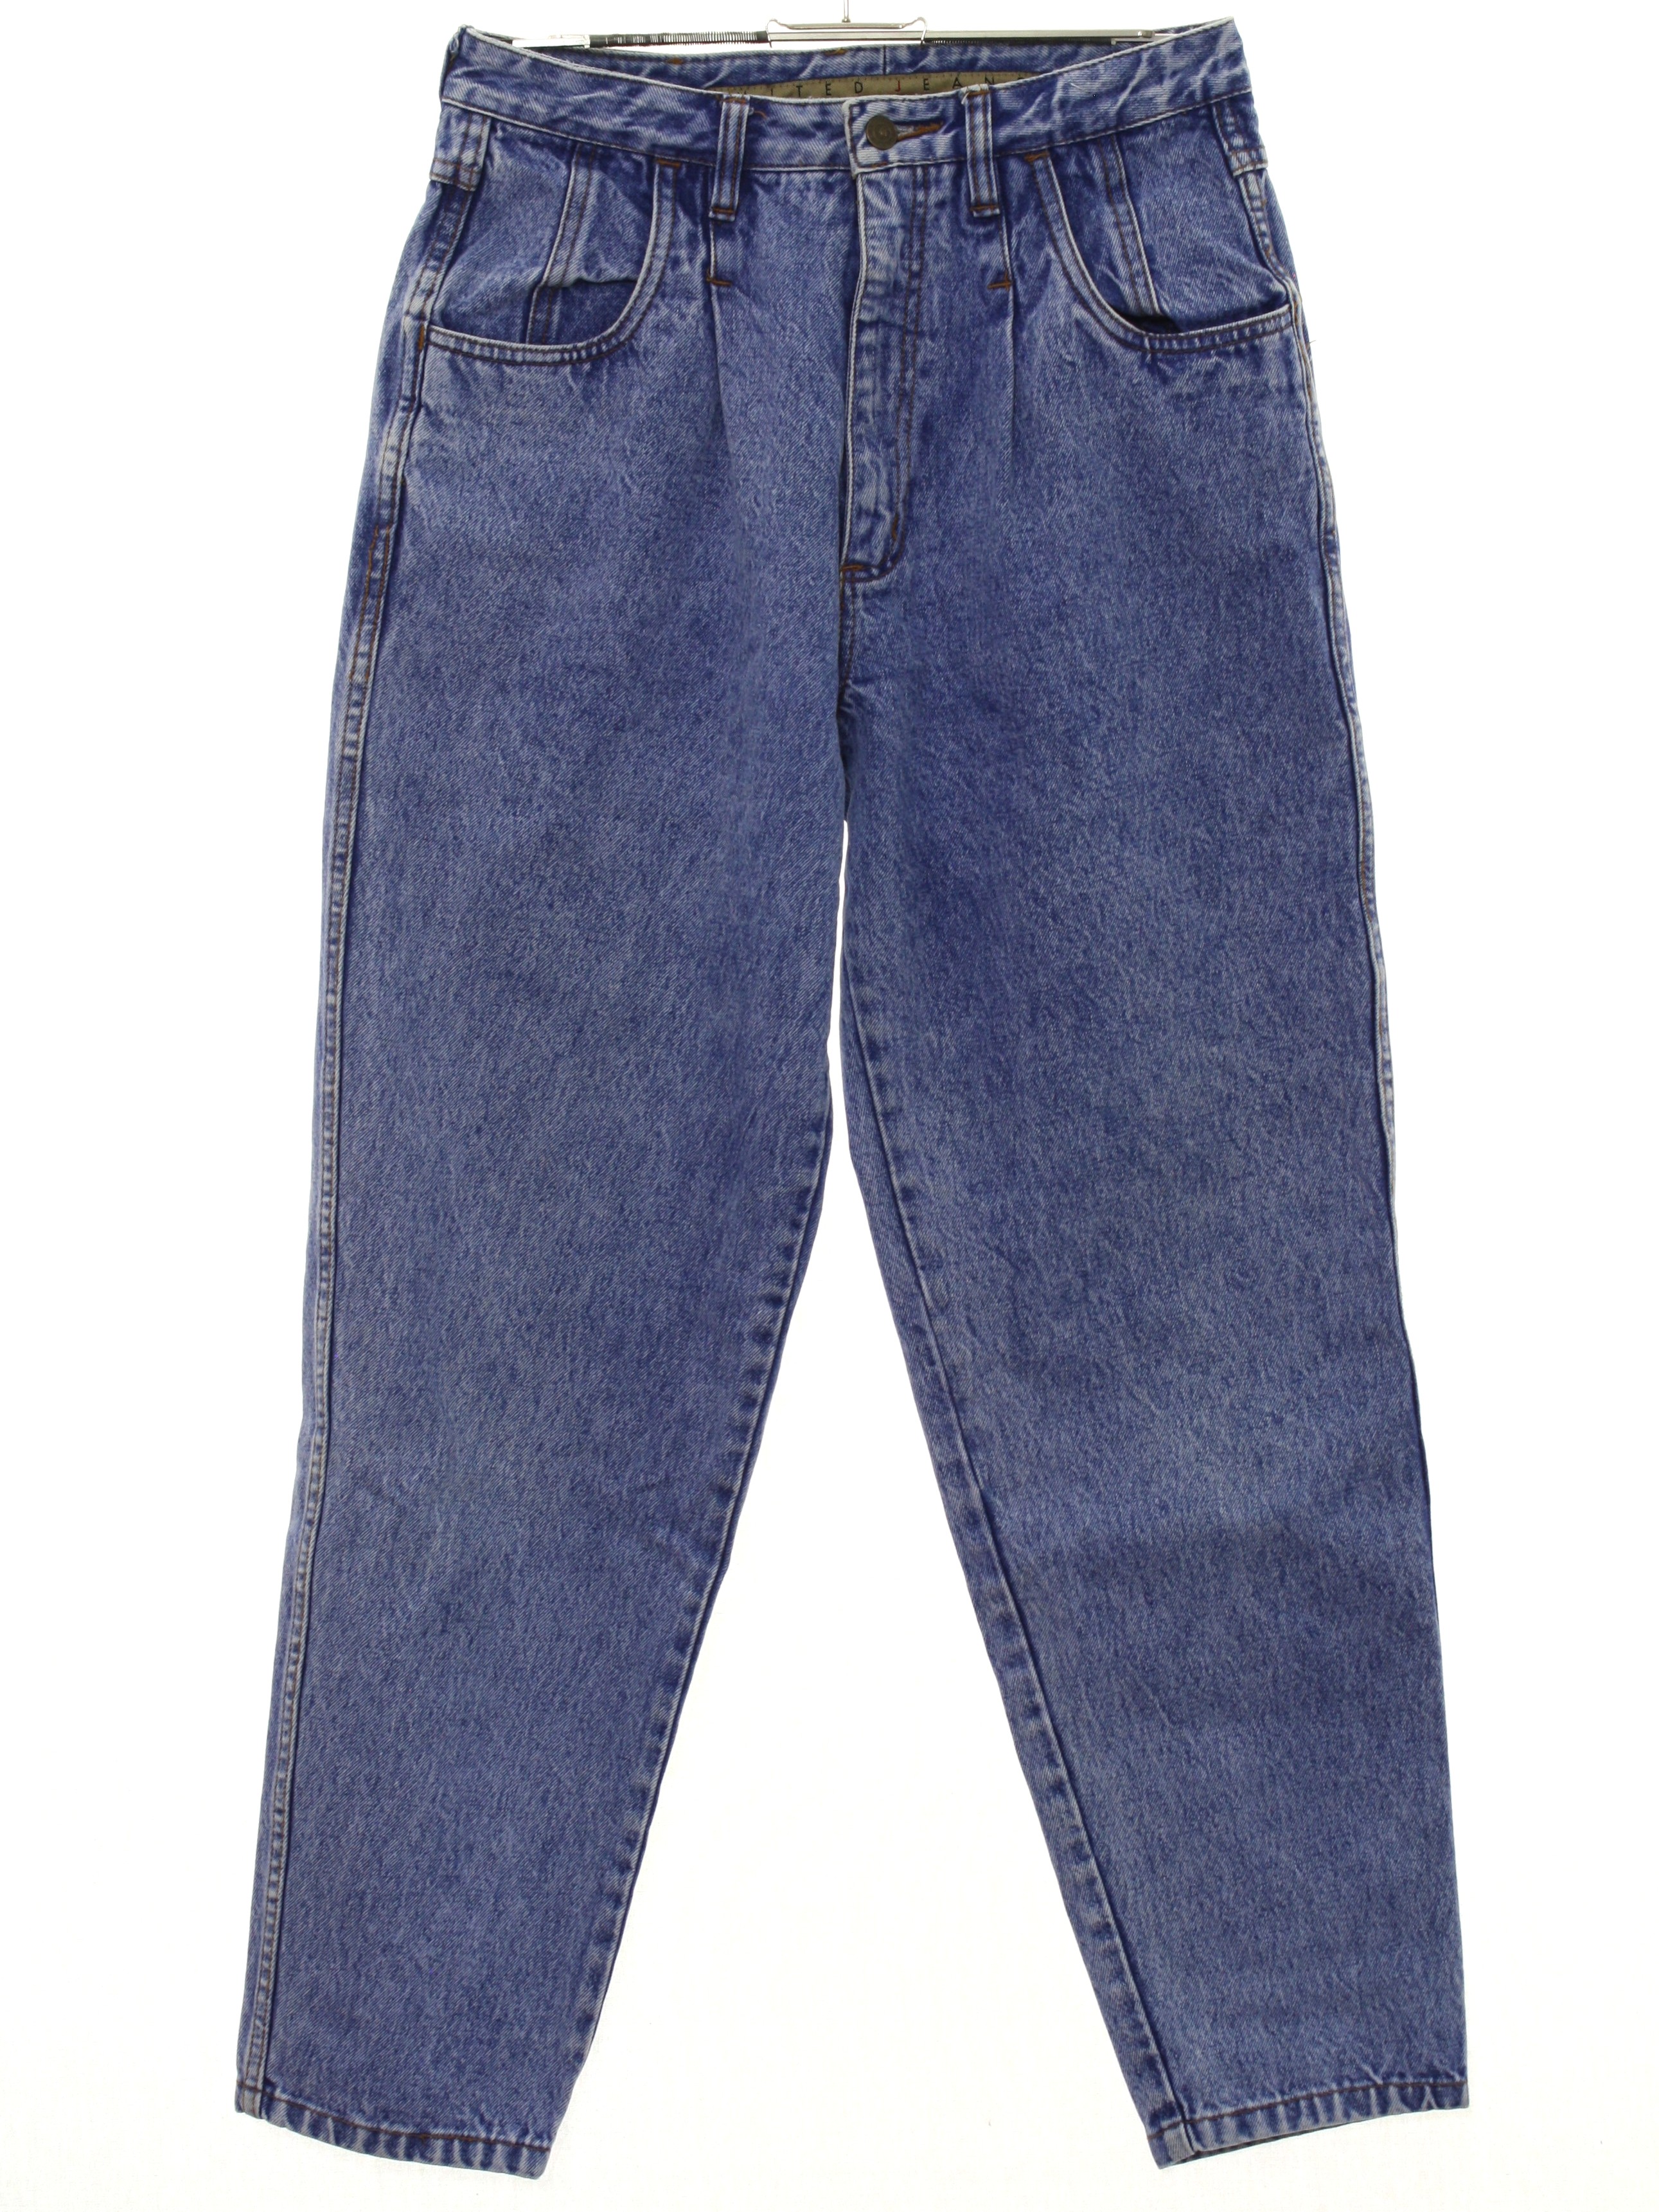 1990's Pants (Limited Jeans): 90s -Limited Jeans- Womens stone washed ...